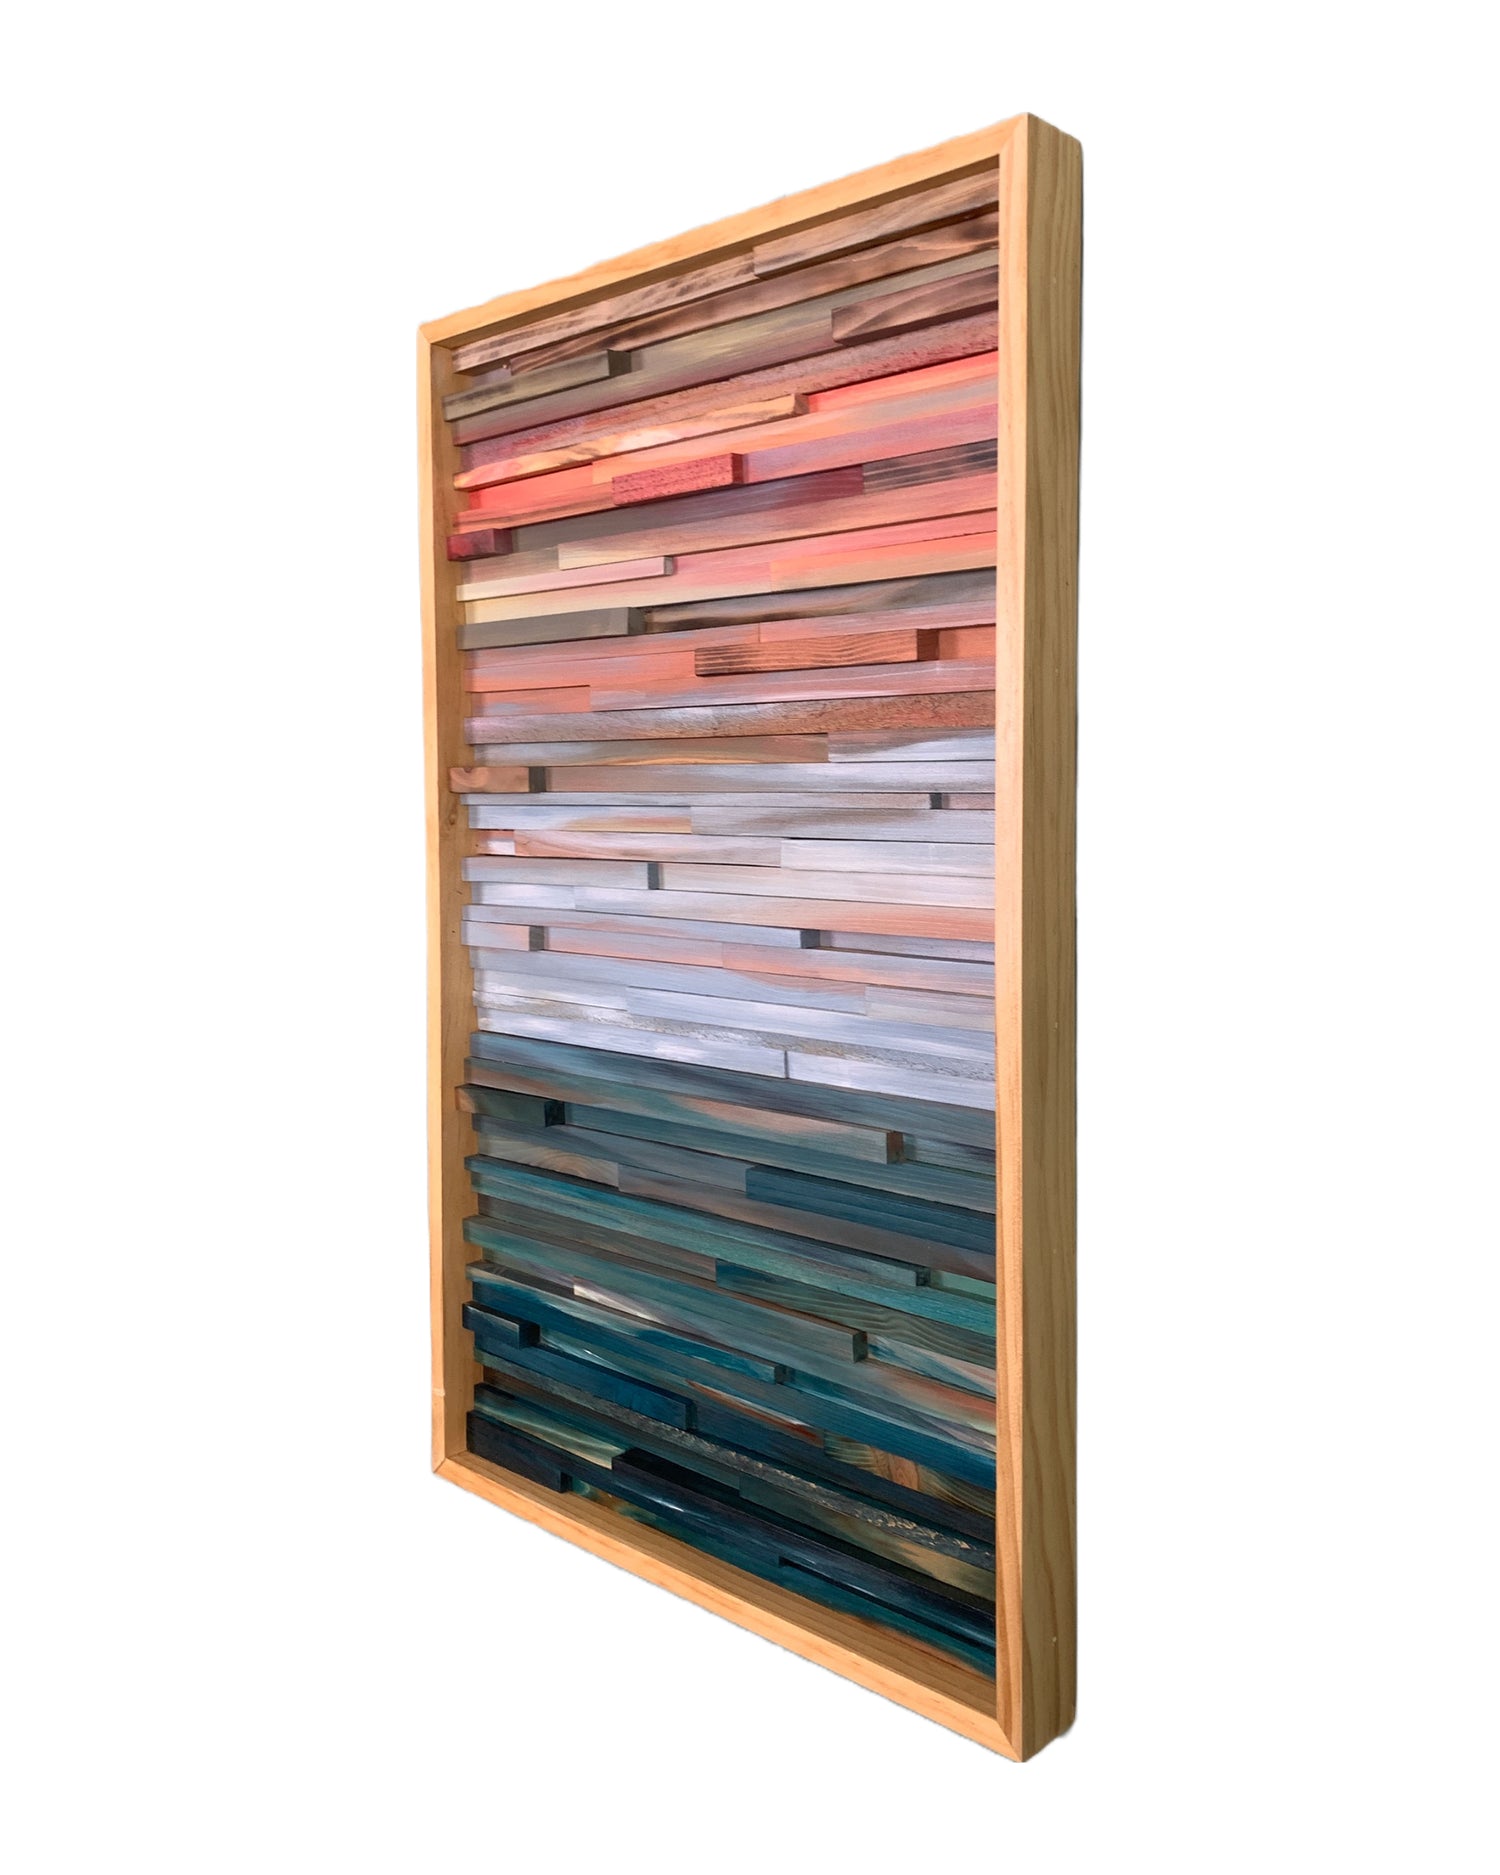 Coral Sky Over Ocean Impression Modern Wood Wall Art - Left Side View